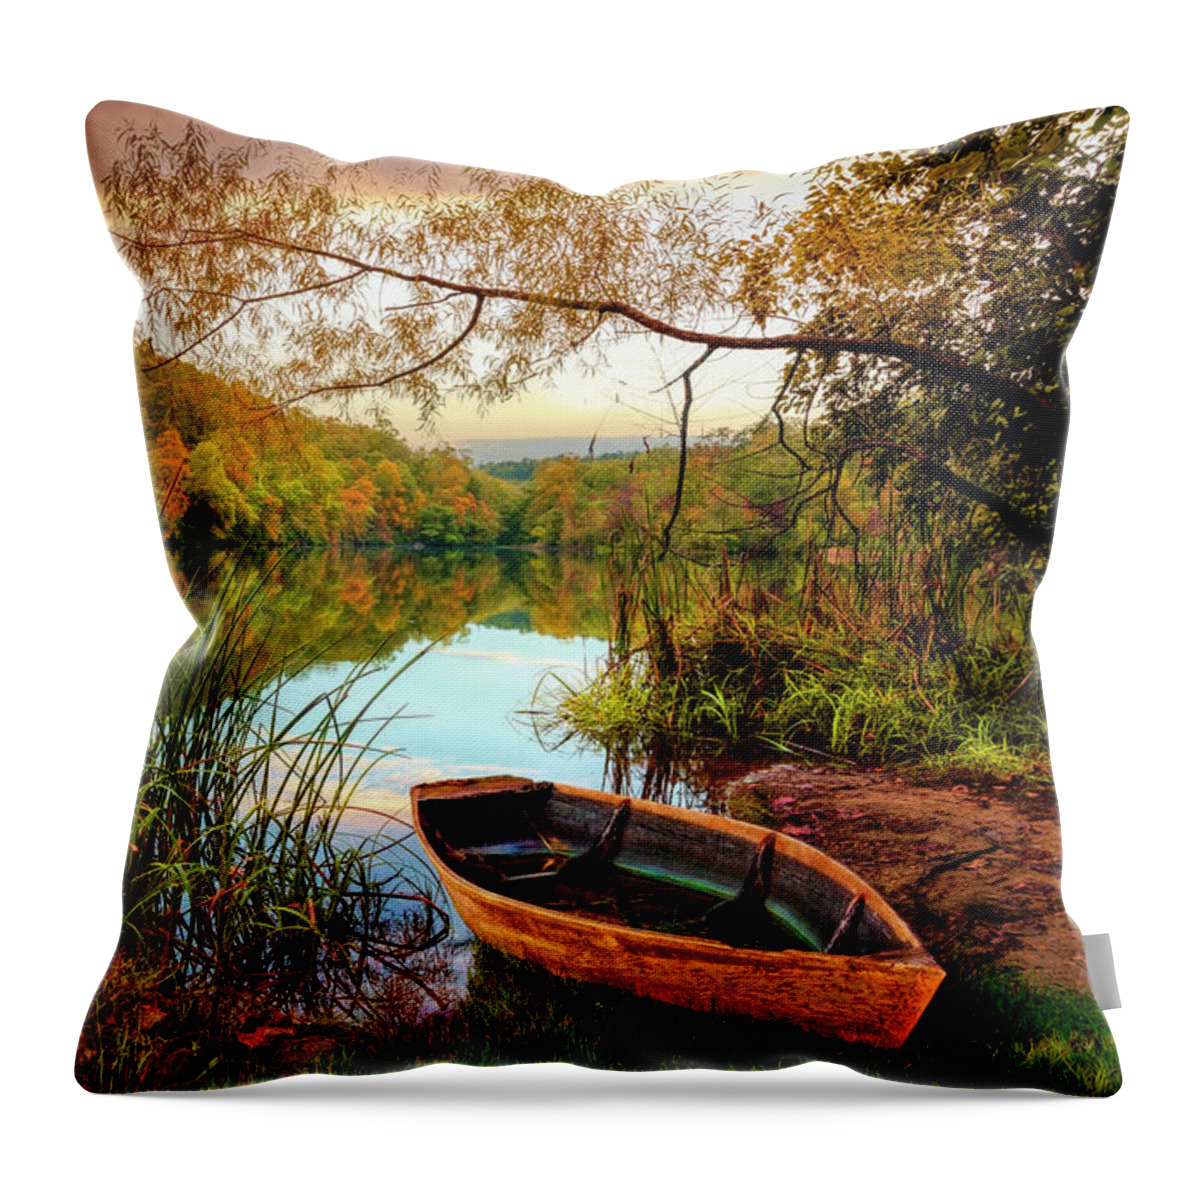 Carolina Throw Pillow featuring the photograph Autumn Rowboat by Debra and Dave Vanderlaan